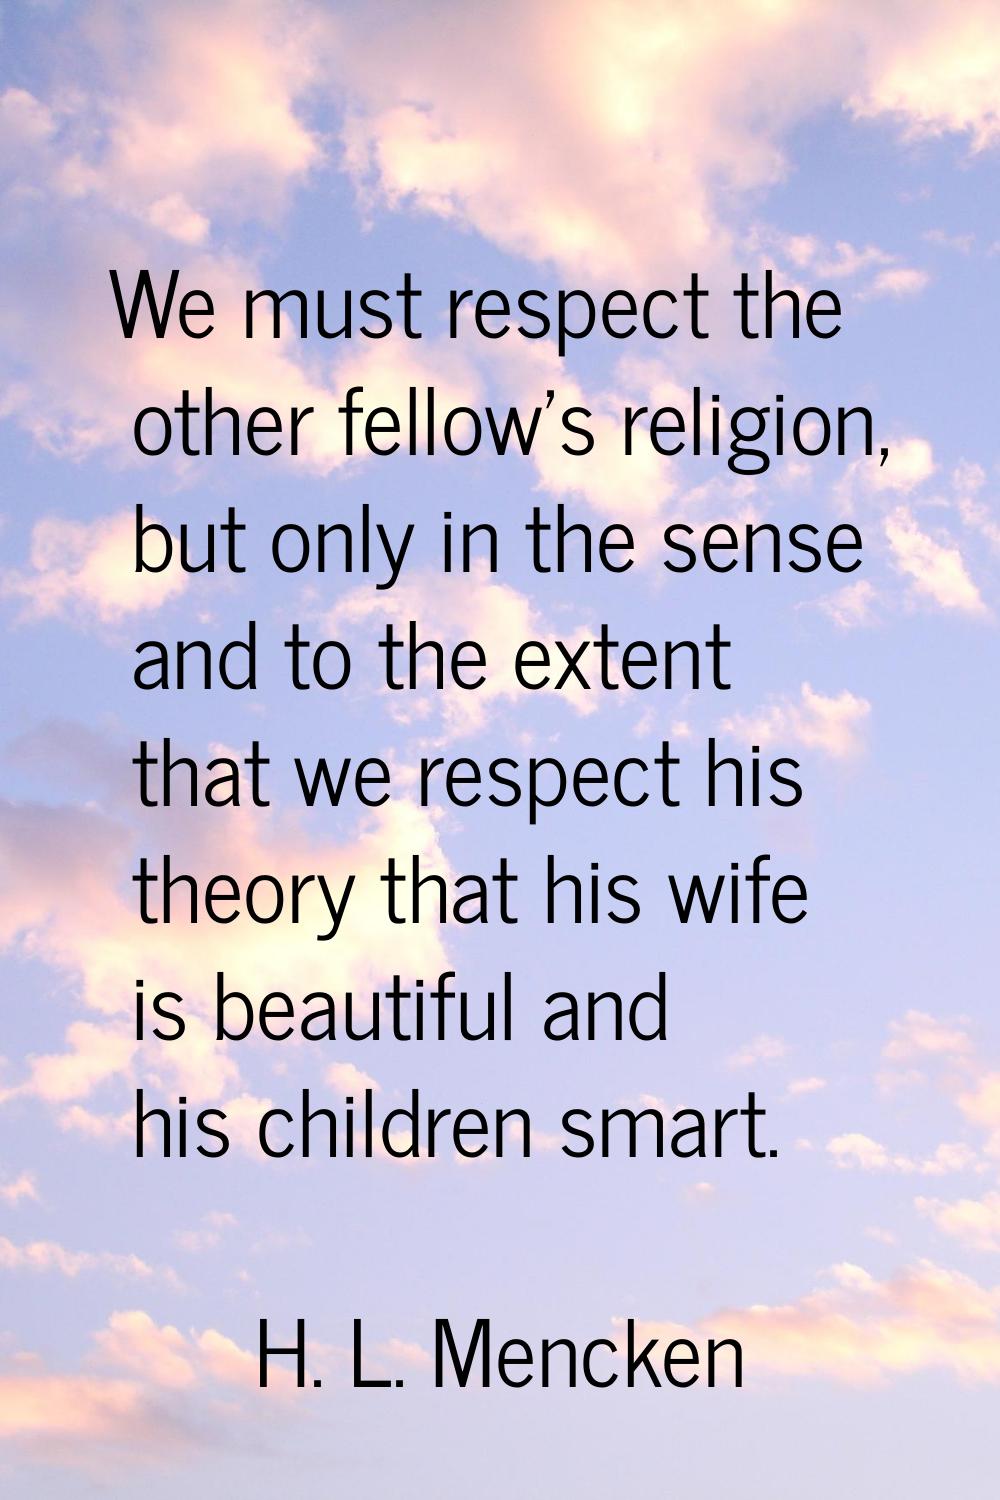 We must respect the other fellow's religion, but only in the sense and to the extent that we respec